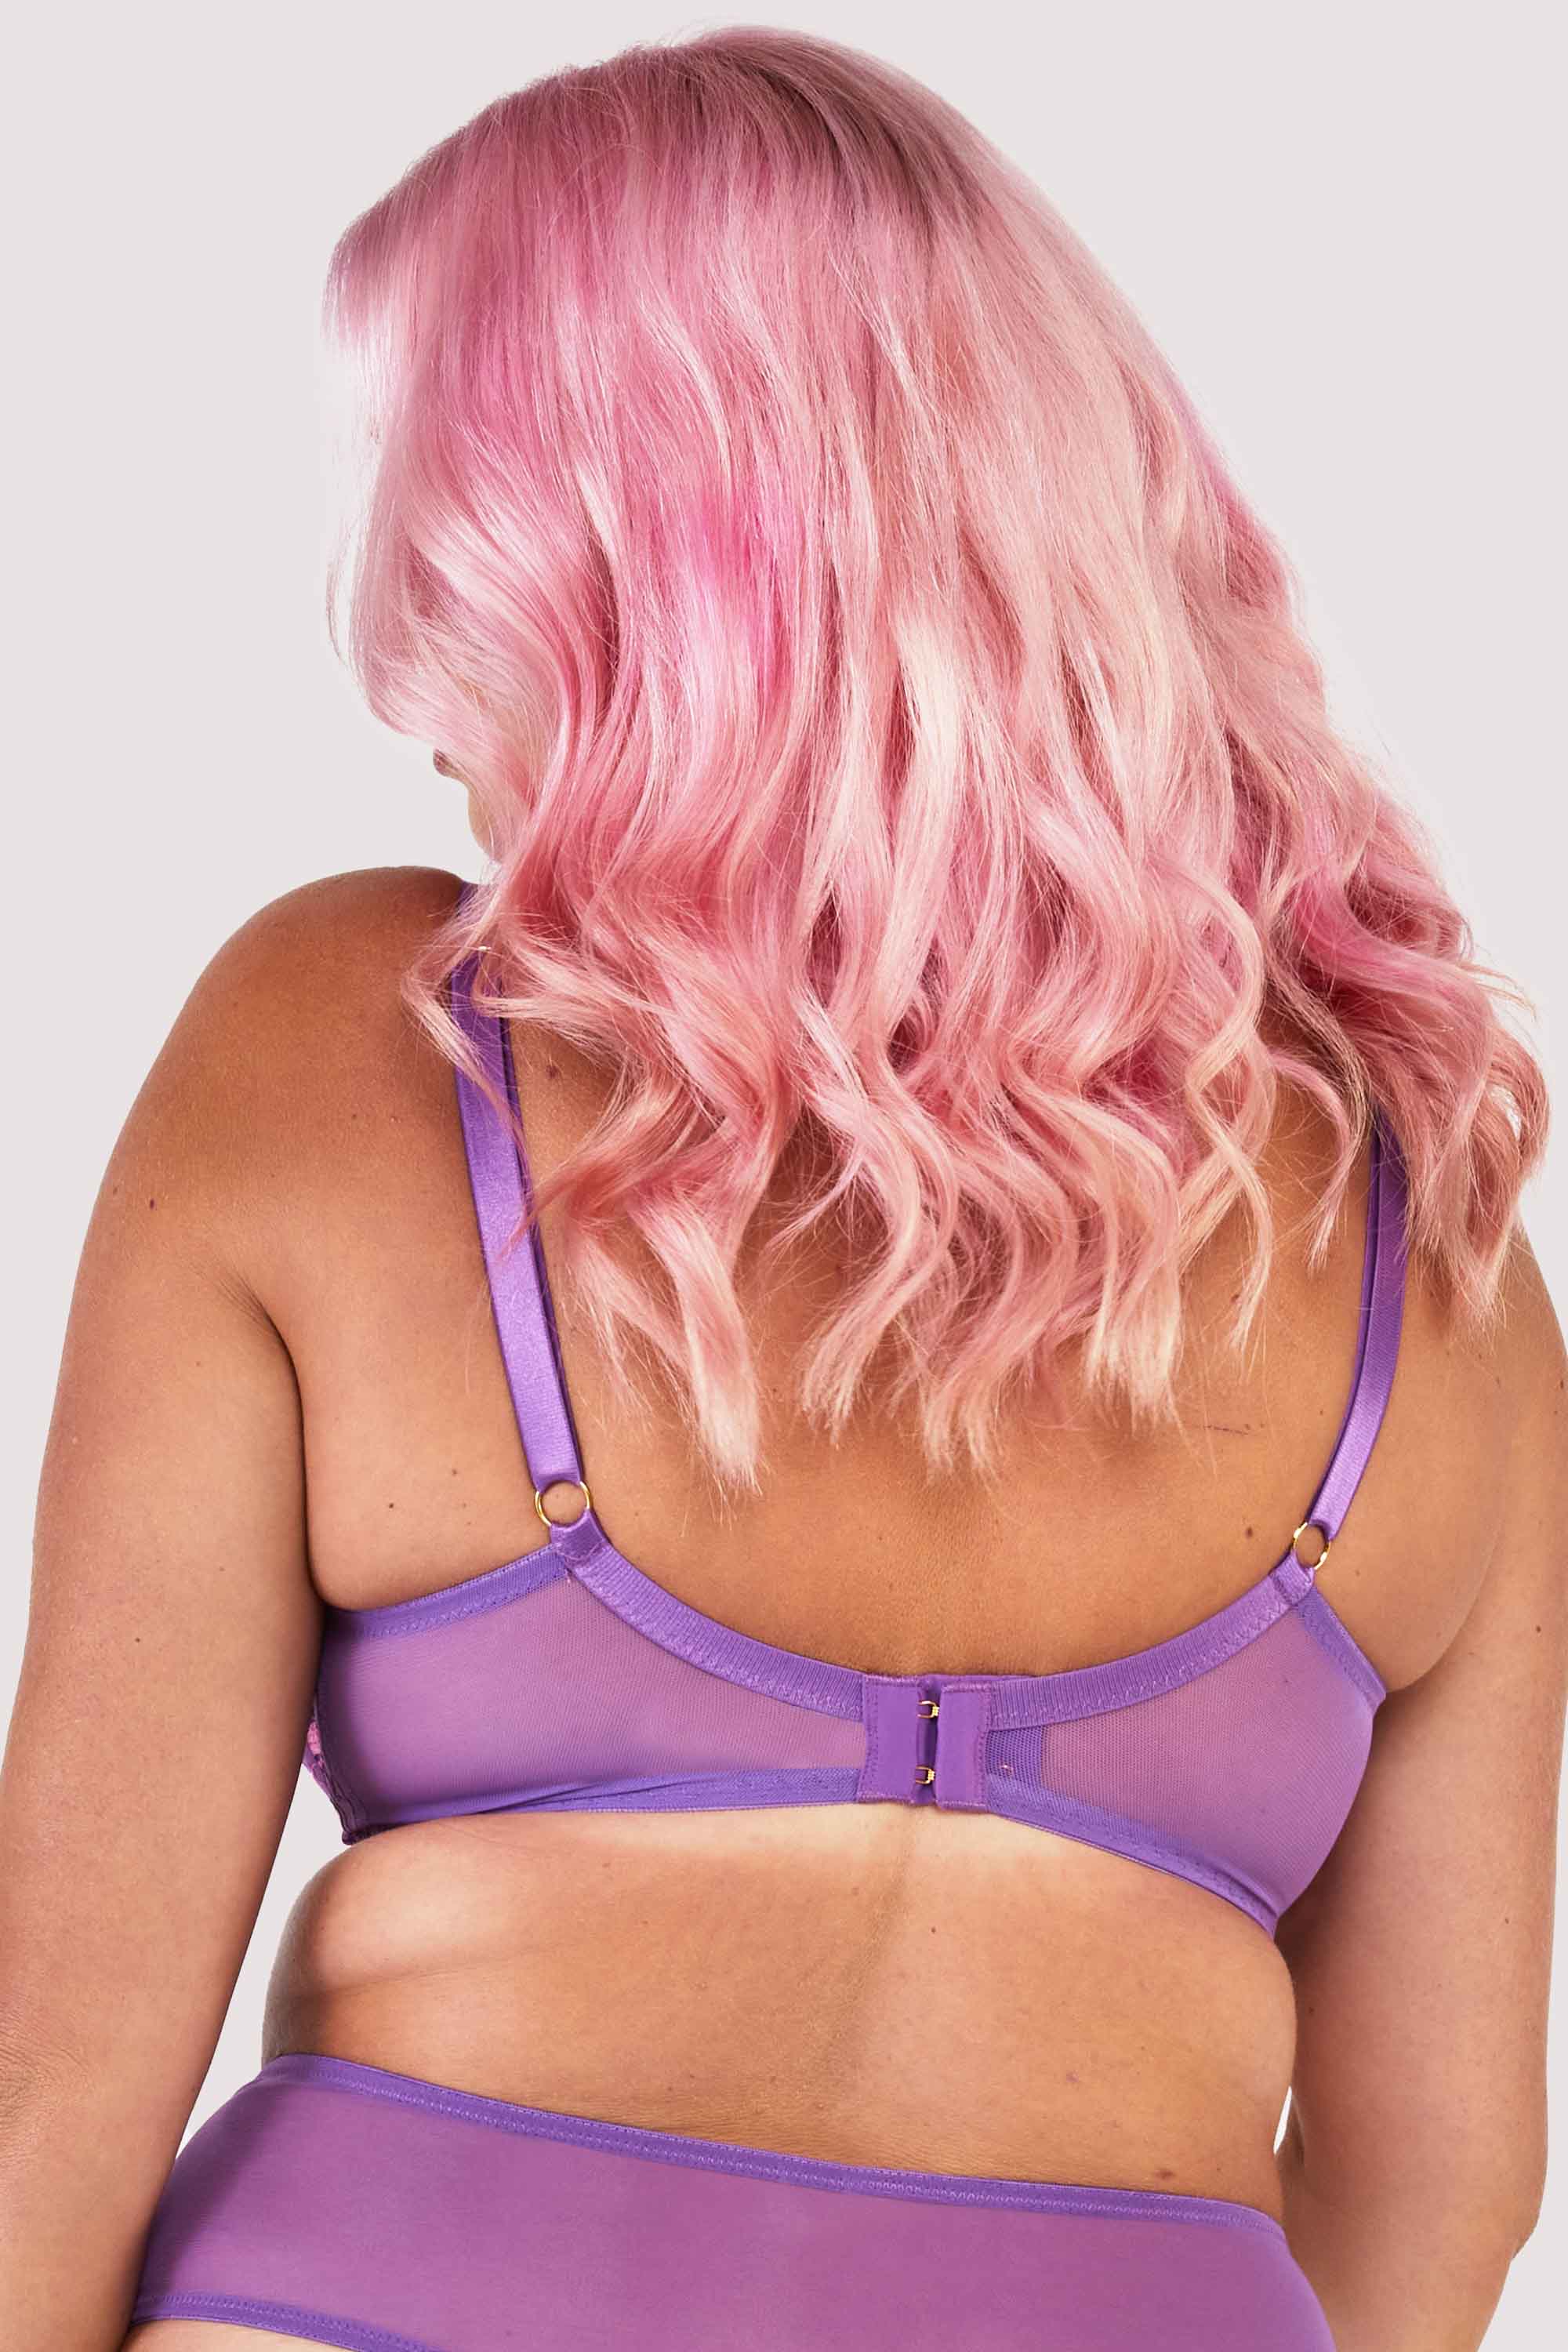 Back view of a mesh purple bra embroidered with a pink and purple floral design, with satin caging over the bust.